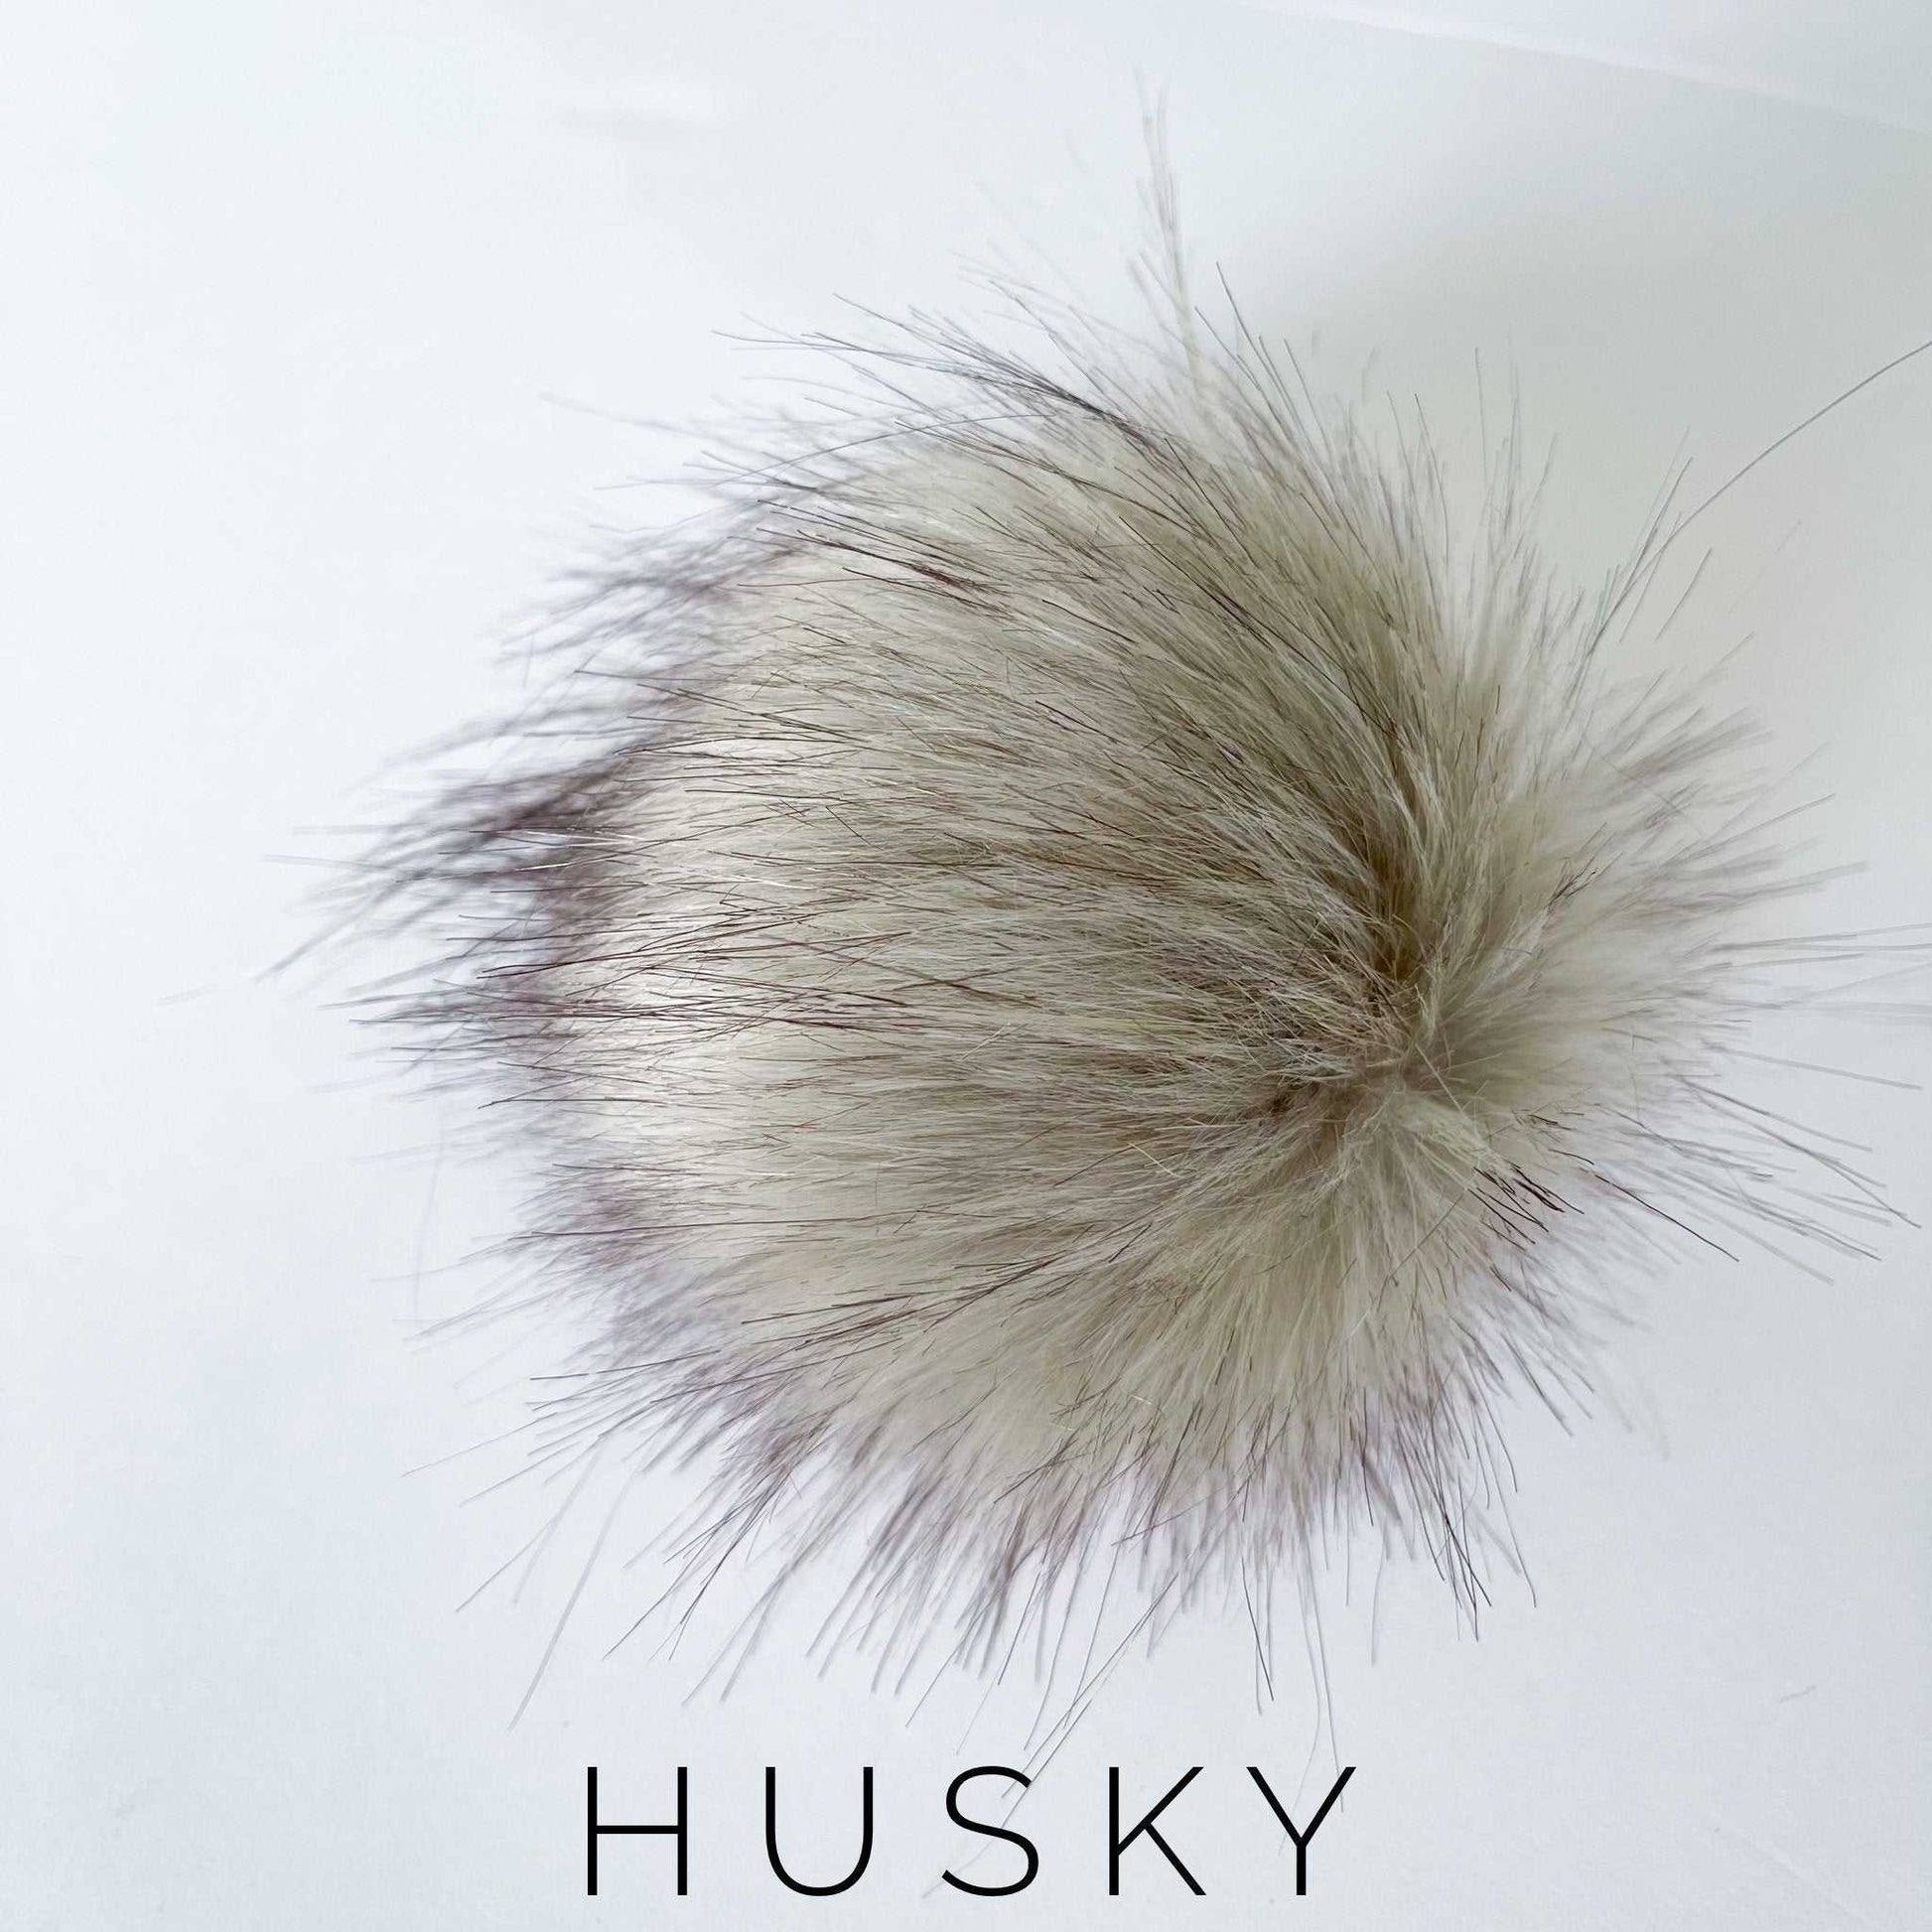 Husky/Honey Faux Fur Fabric by the Yard or Meter | Grey and Tan Pompom, Arts & Crafts, Decor, Costume Faux Fur Fabric 3 $ Buttons & Beans Co.